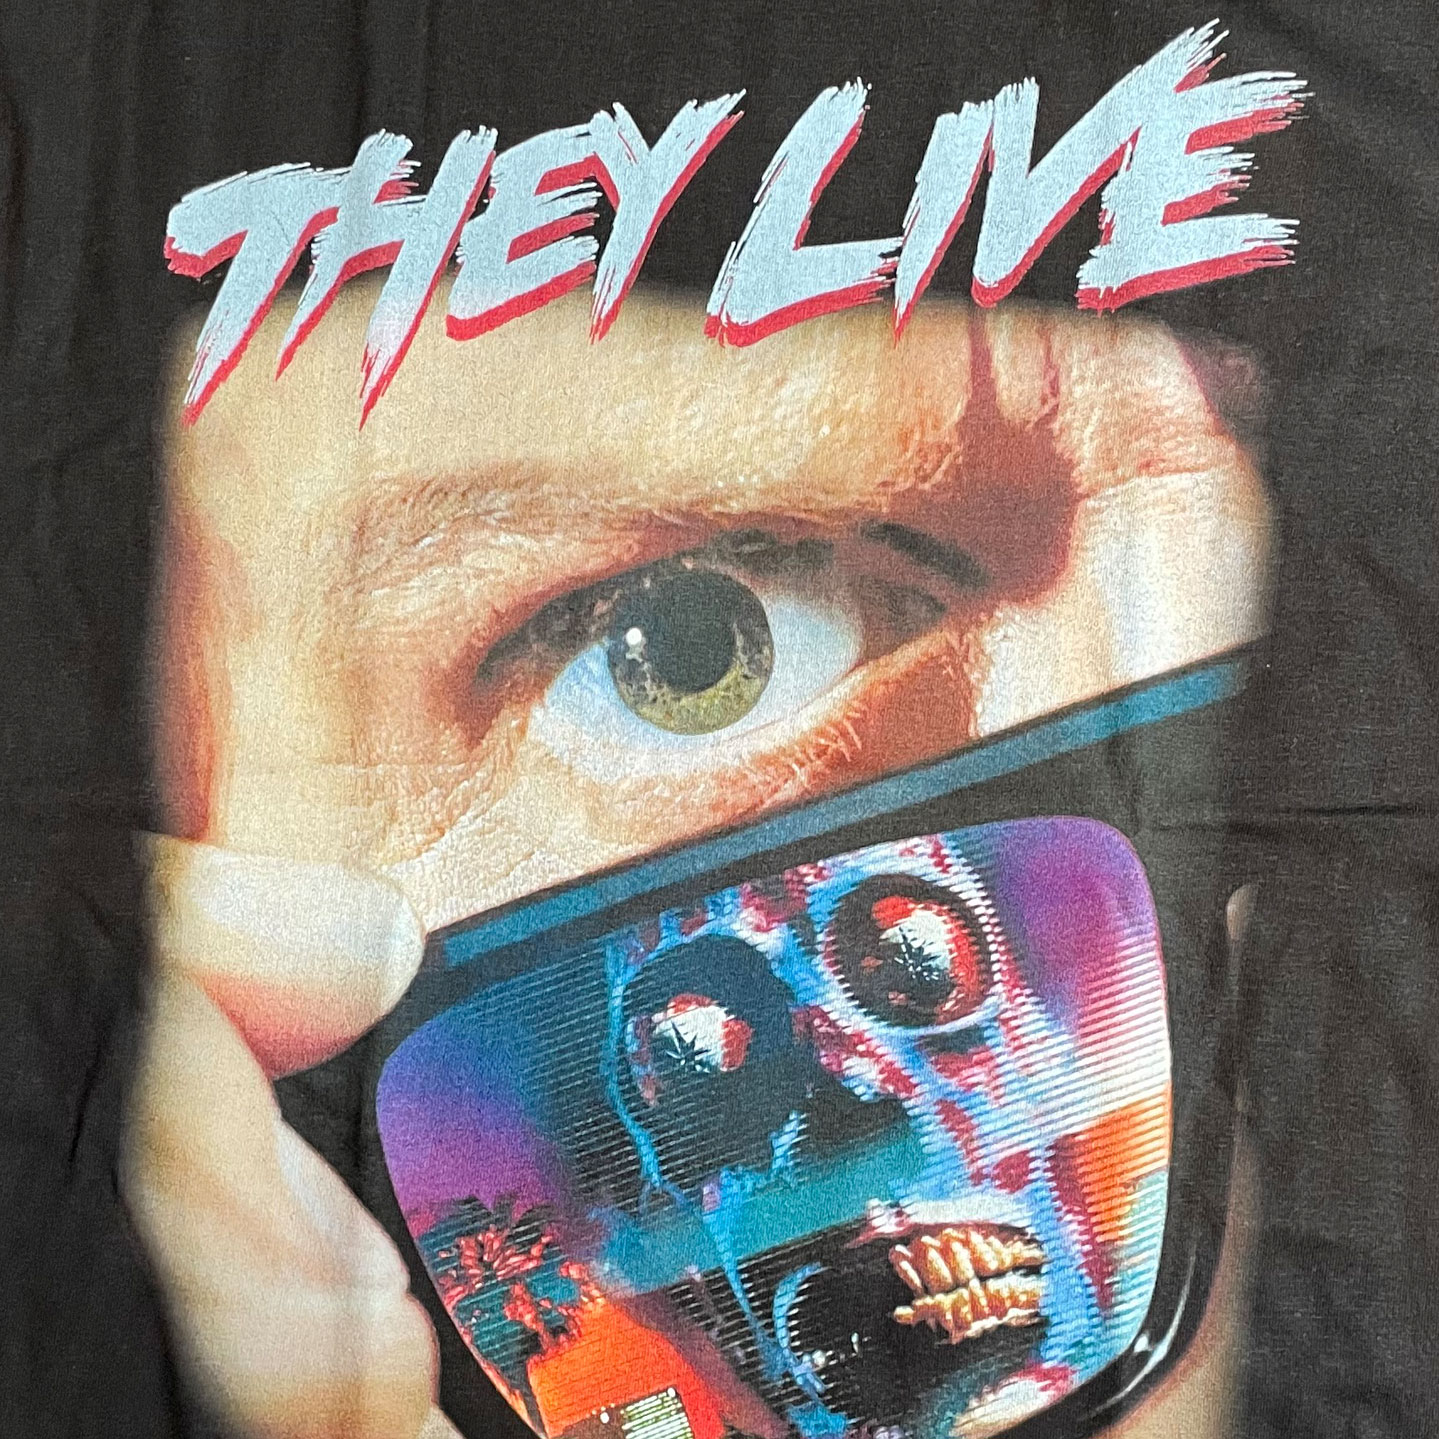 THEY LIVE Tシャツ